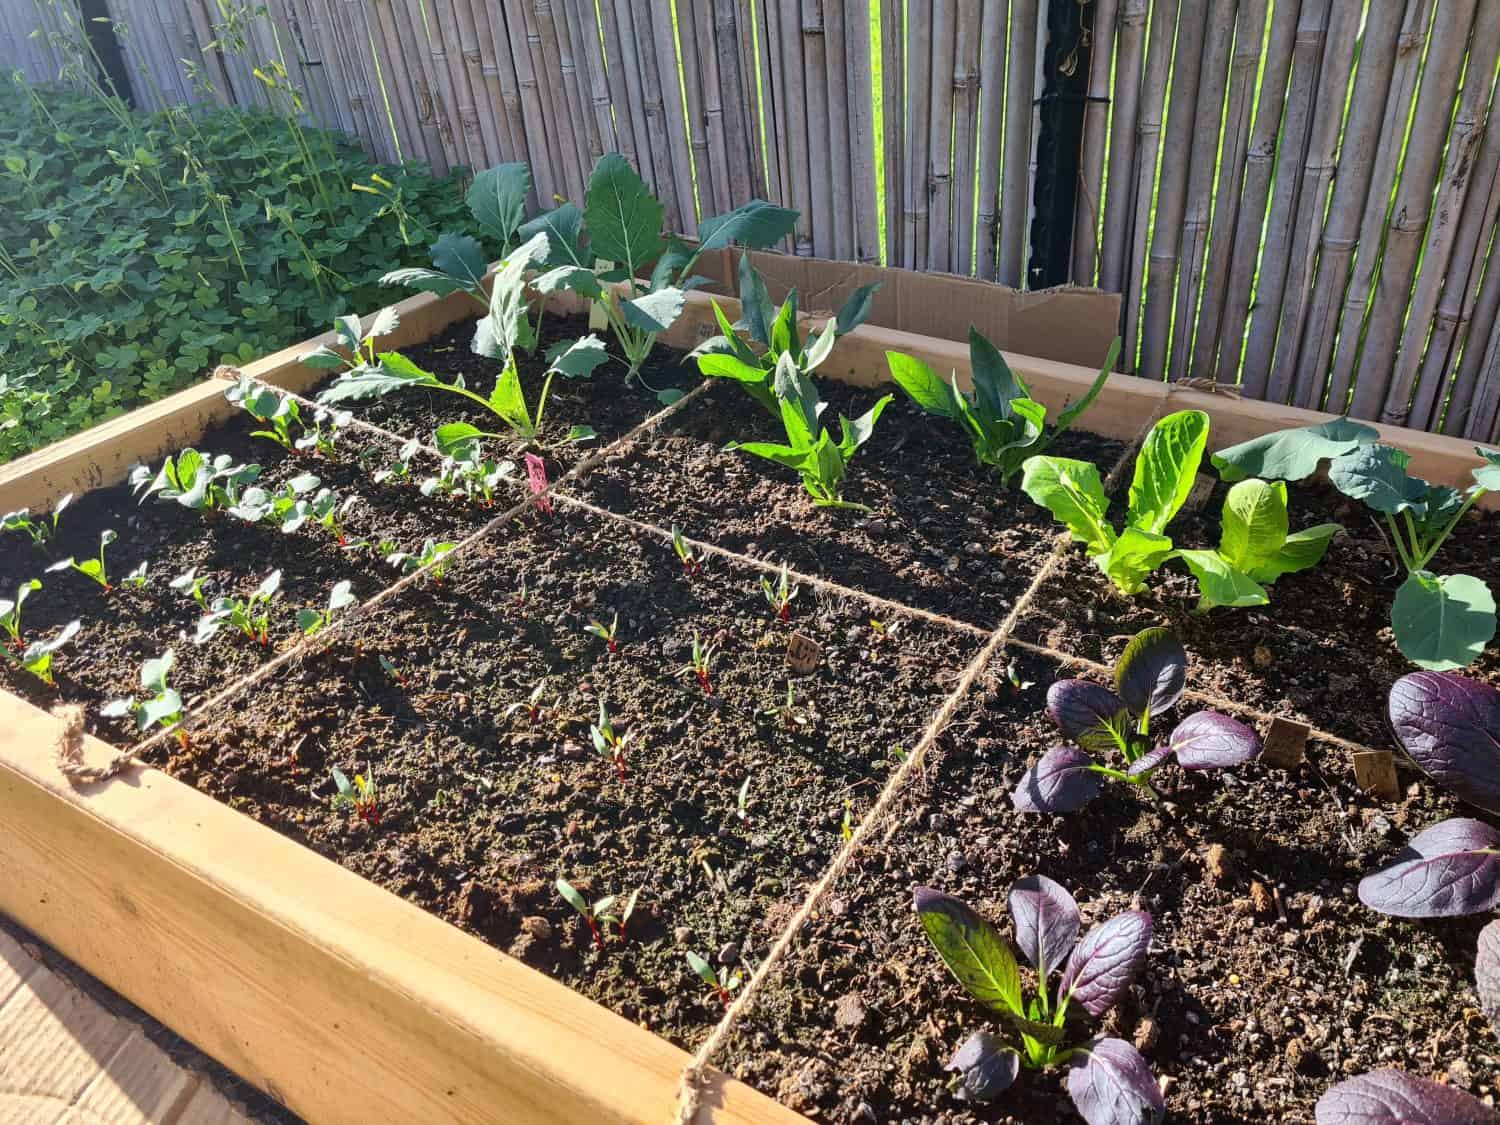 growing organic vegetables in a square food gardening method. The vegetables are growing in a raised bed, full of mature green compost with nod-dig gardening.